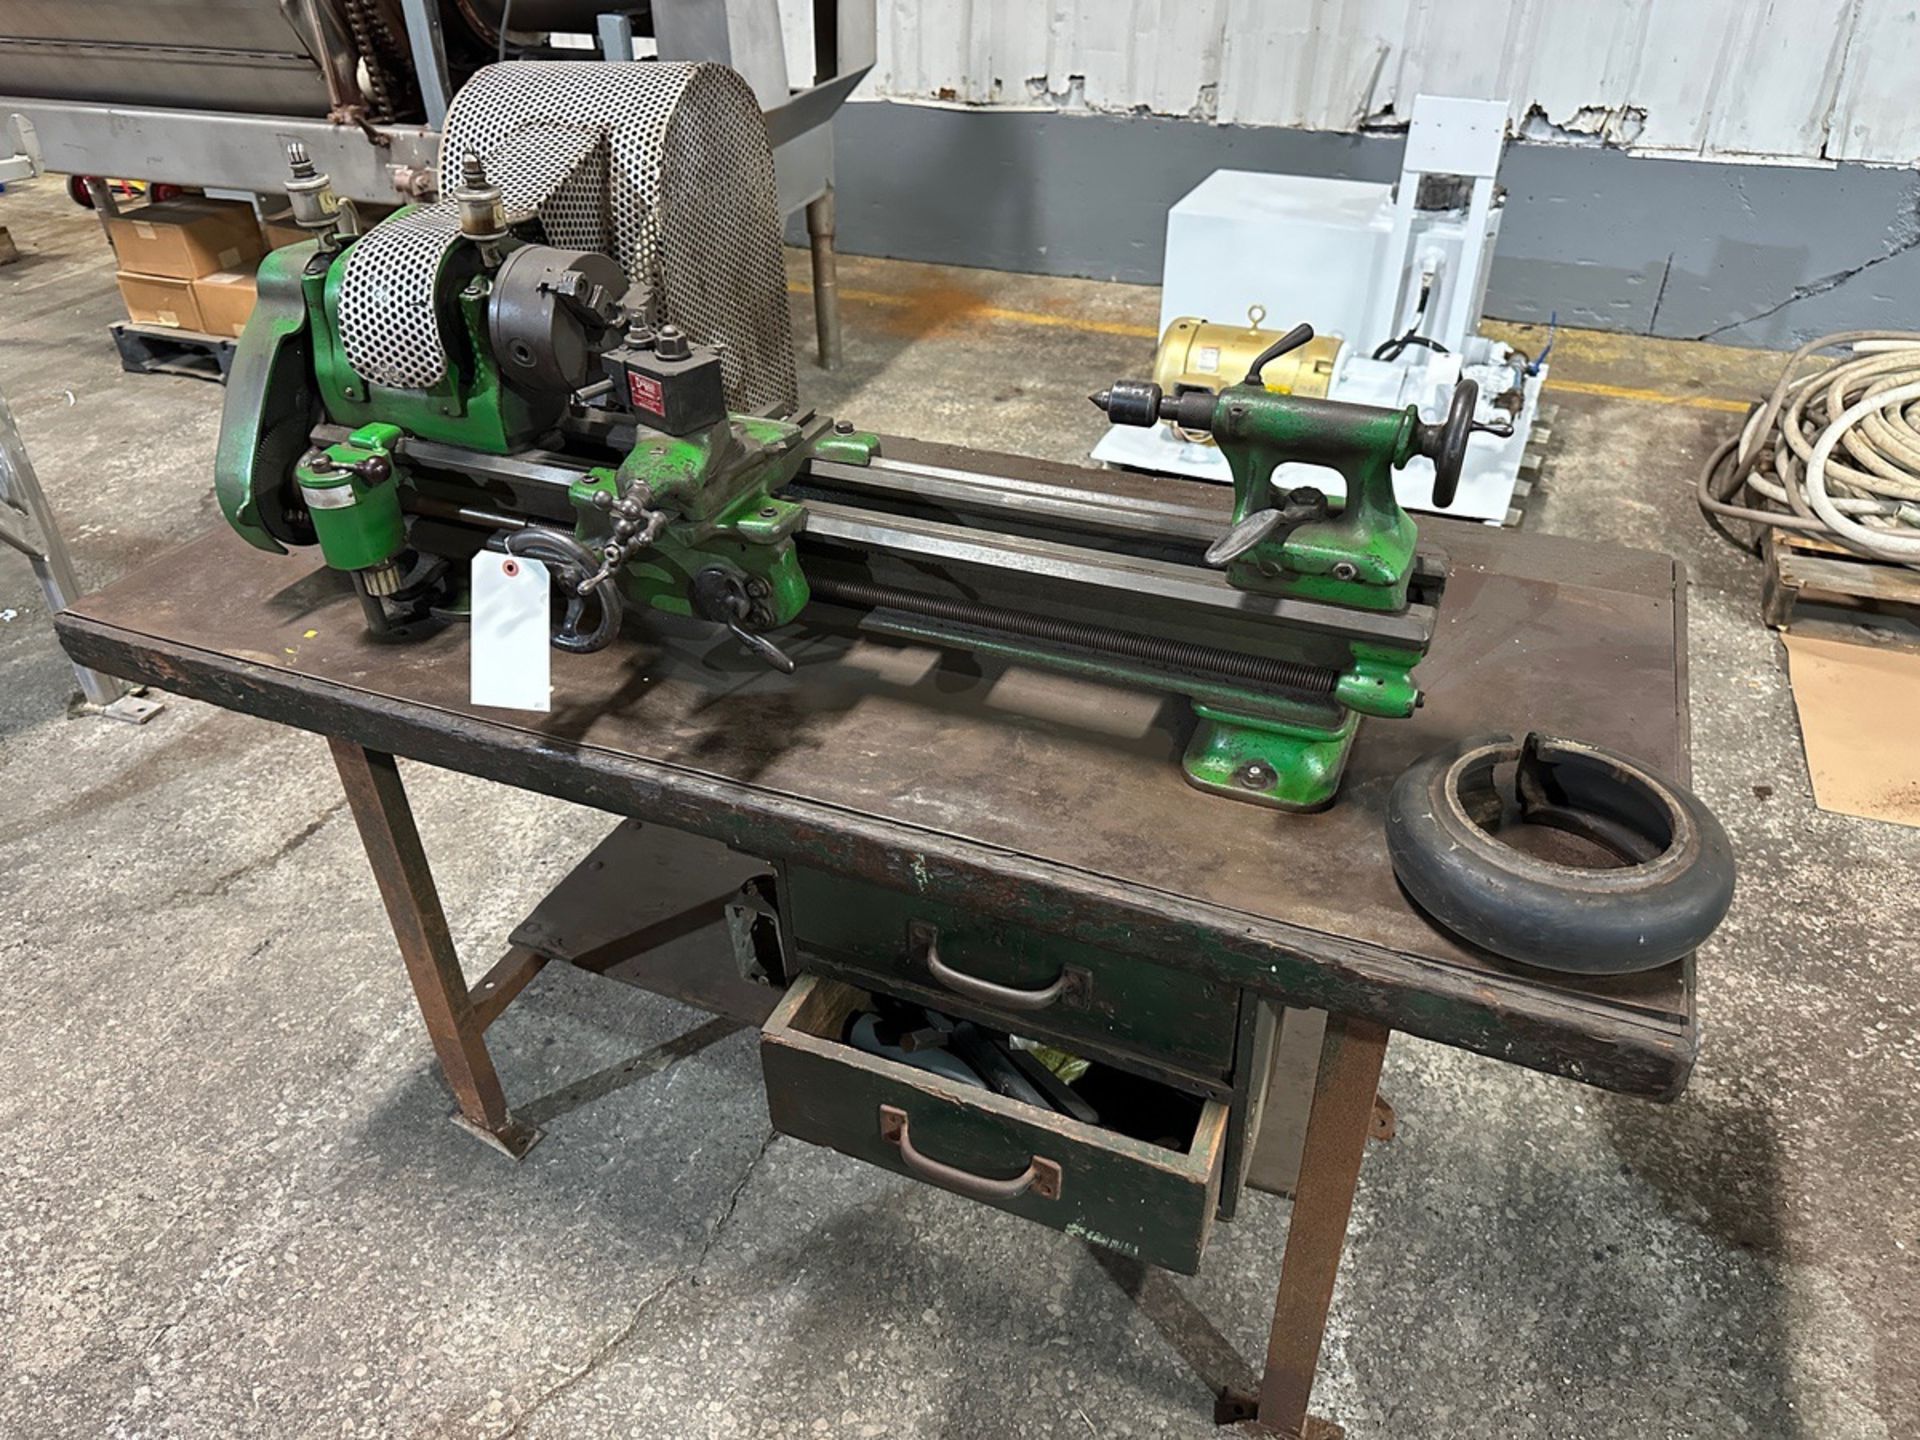 Benchtop Lathe with Bench Included (Approx. 5' x 30") | Rig Fee $100